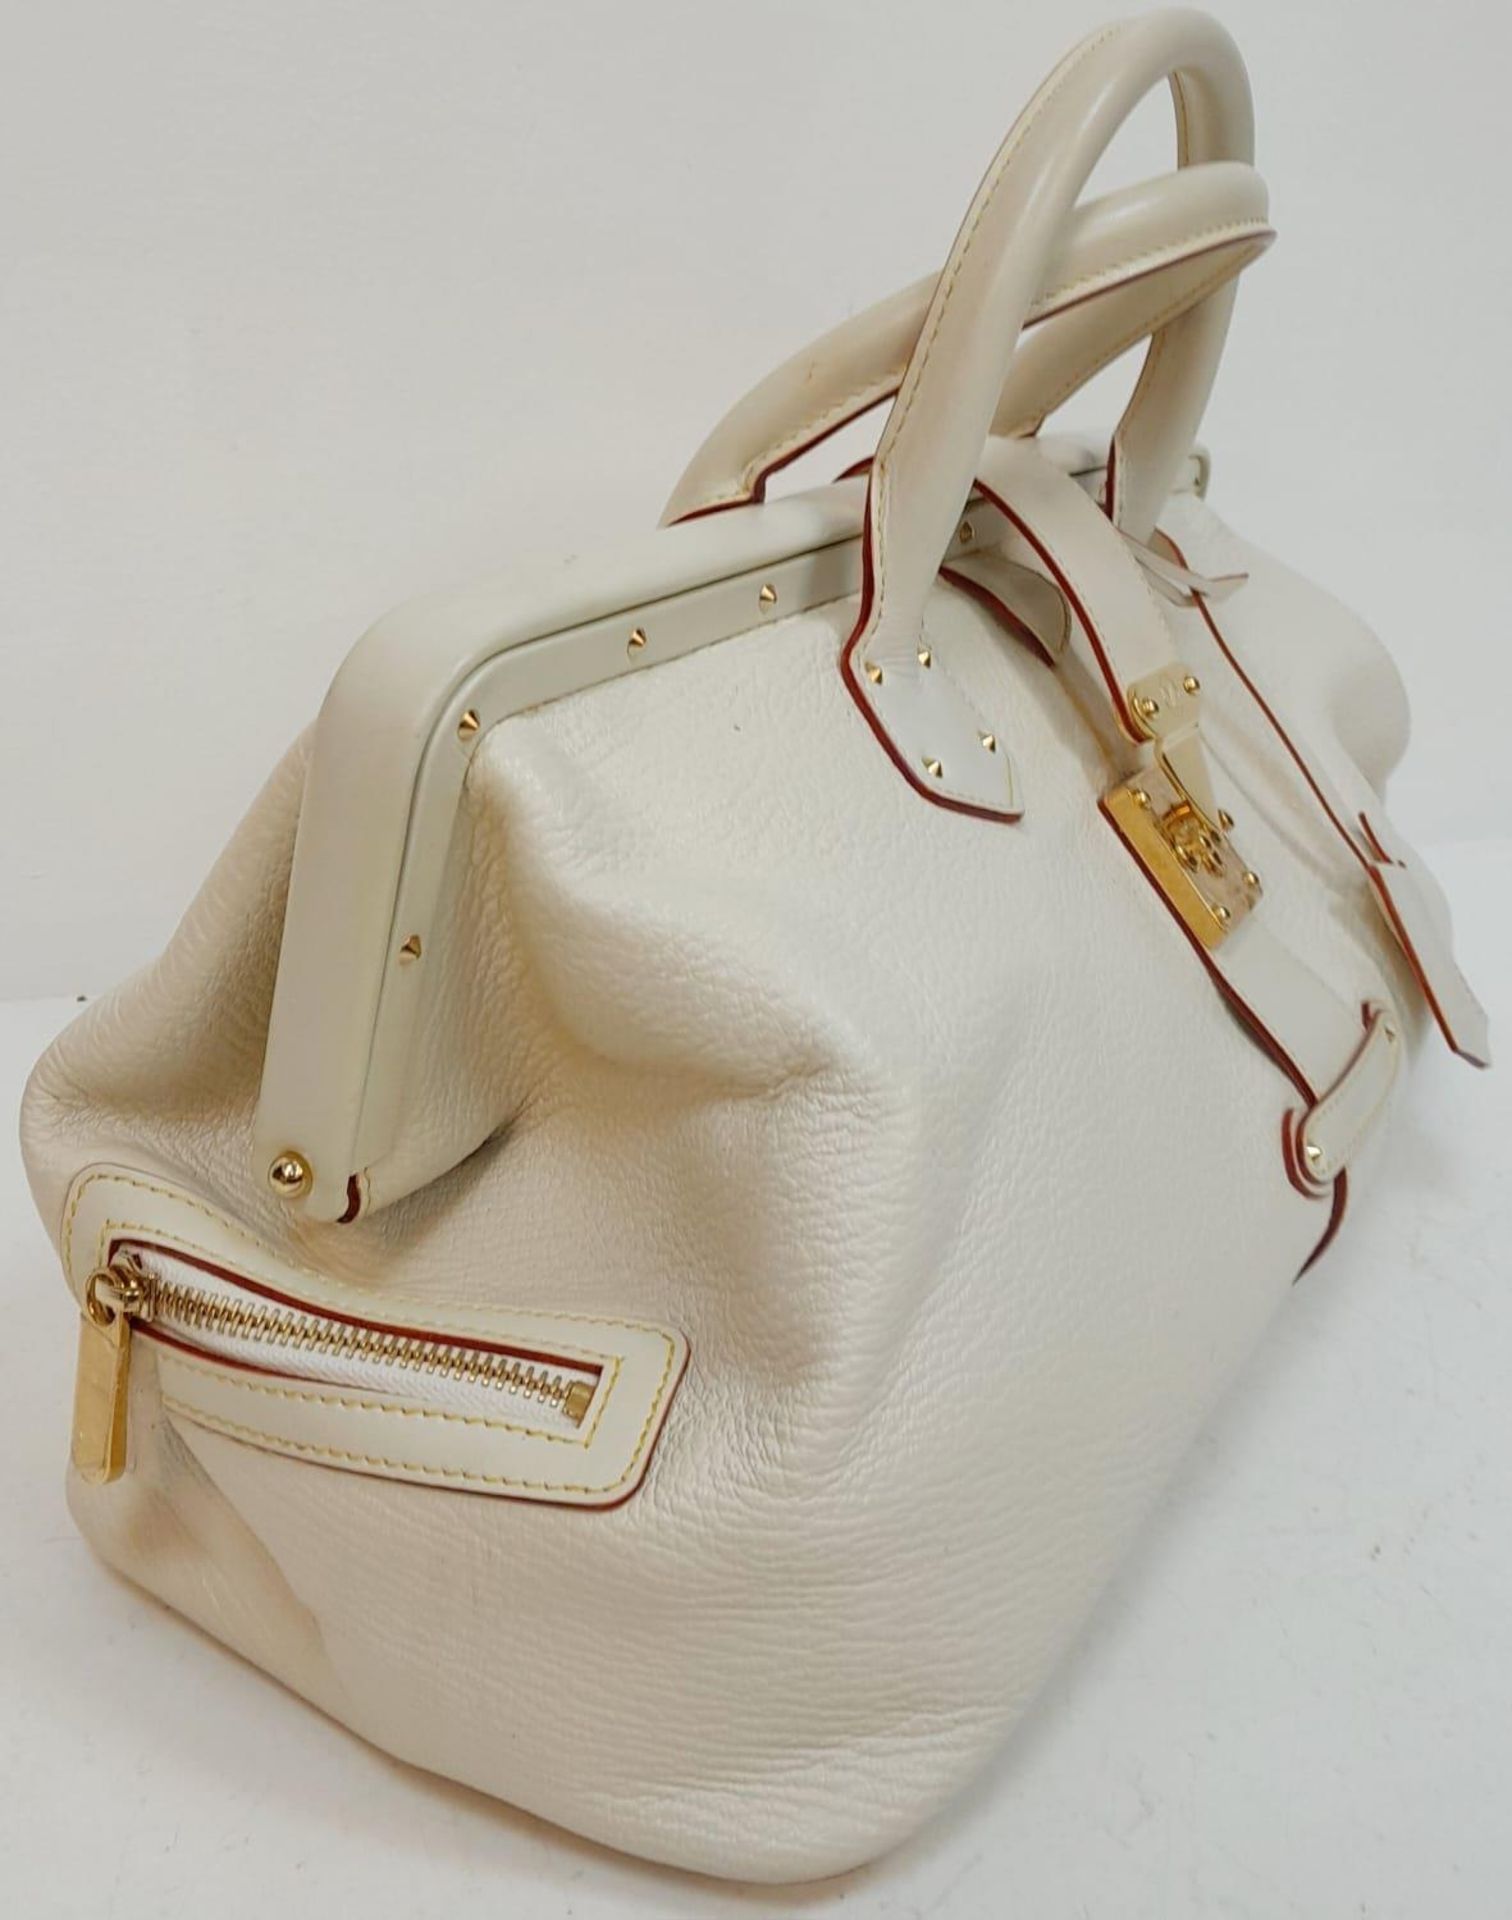 A Louis Vuitton Manhattan PM Suhali Leather Handbag. Soft white textured leather exterior with - Image 7 of 9